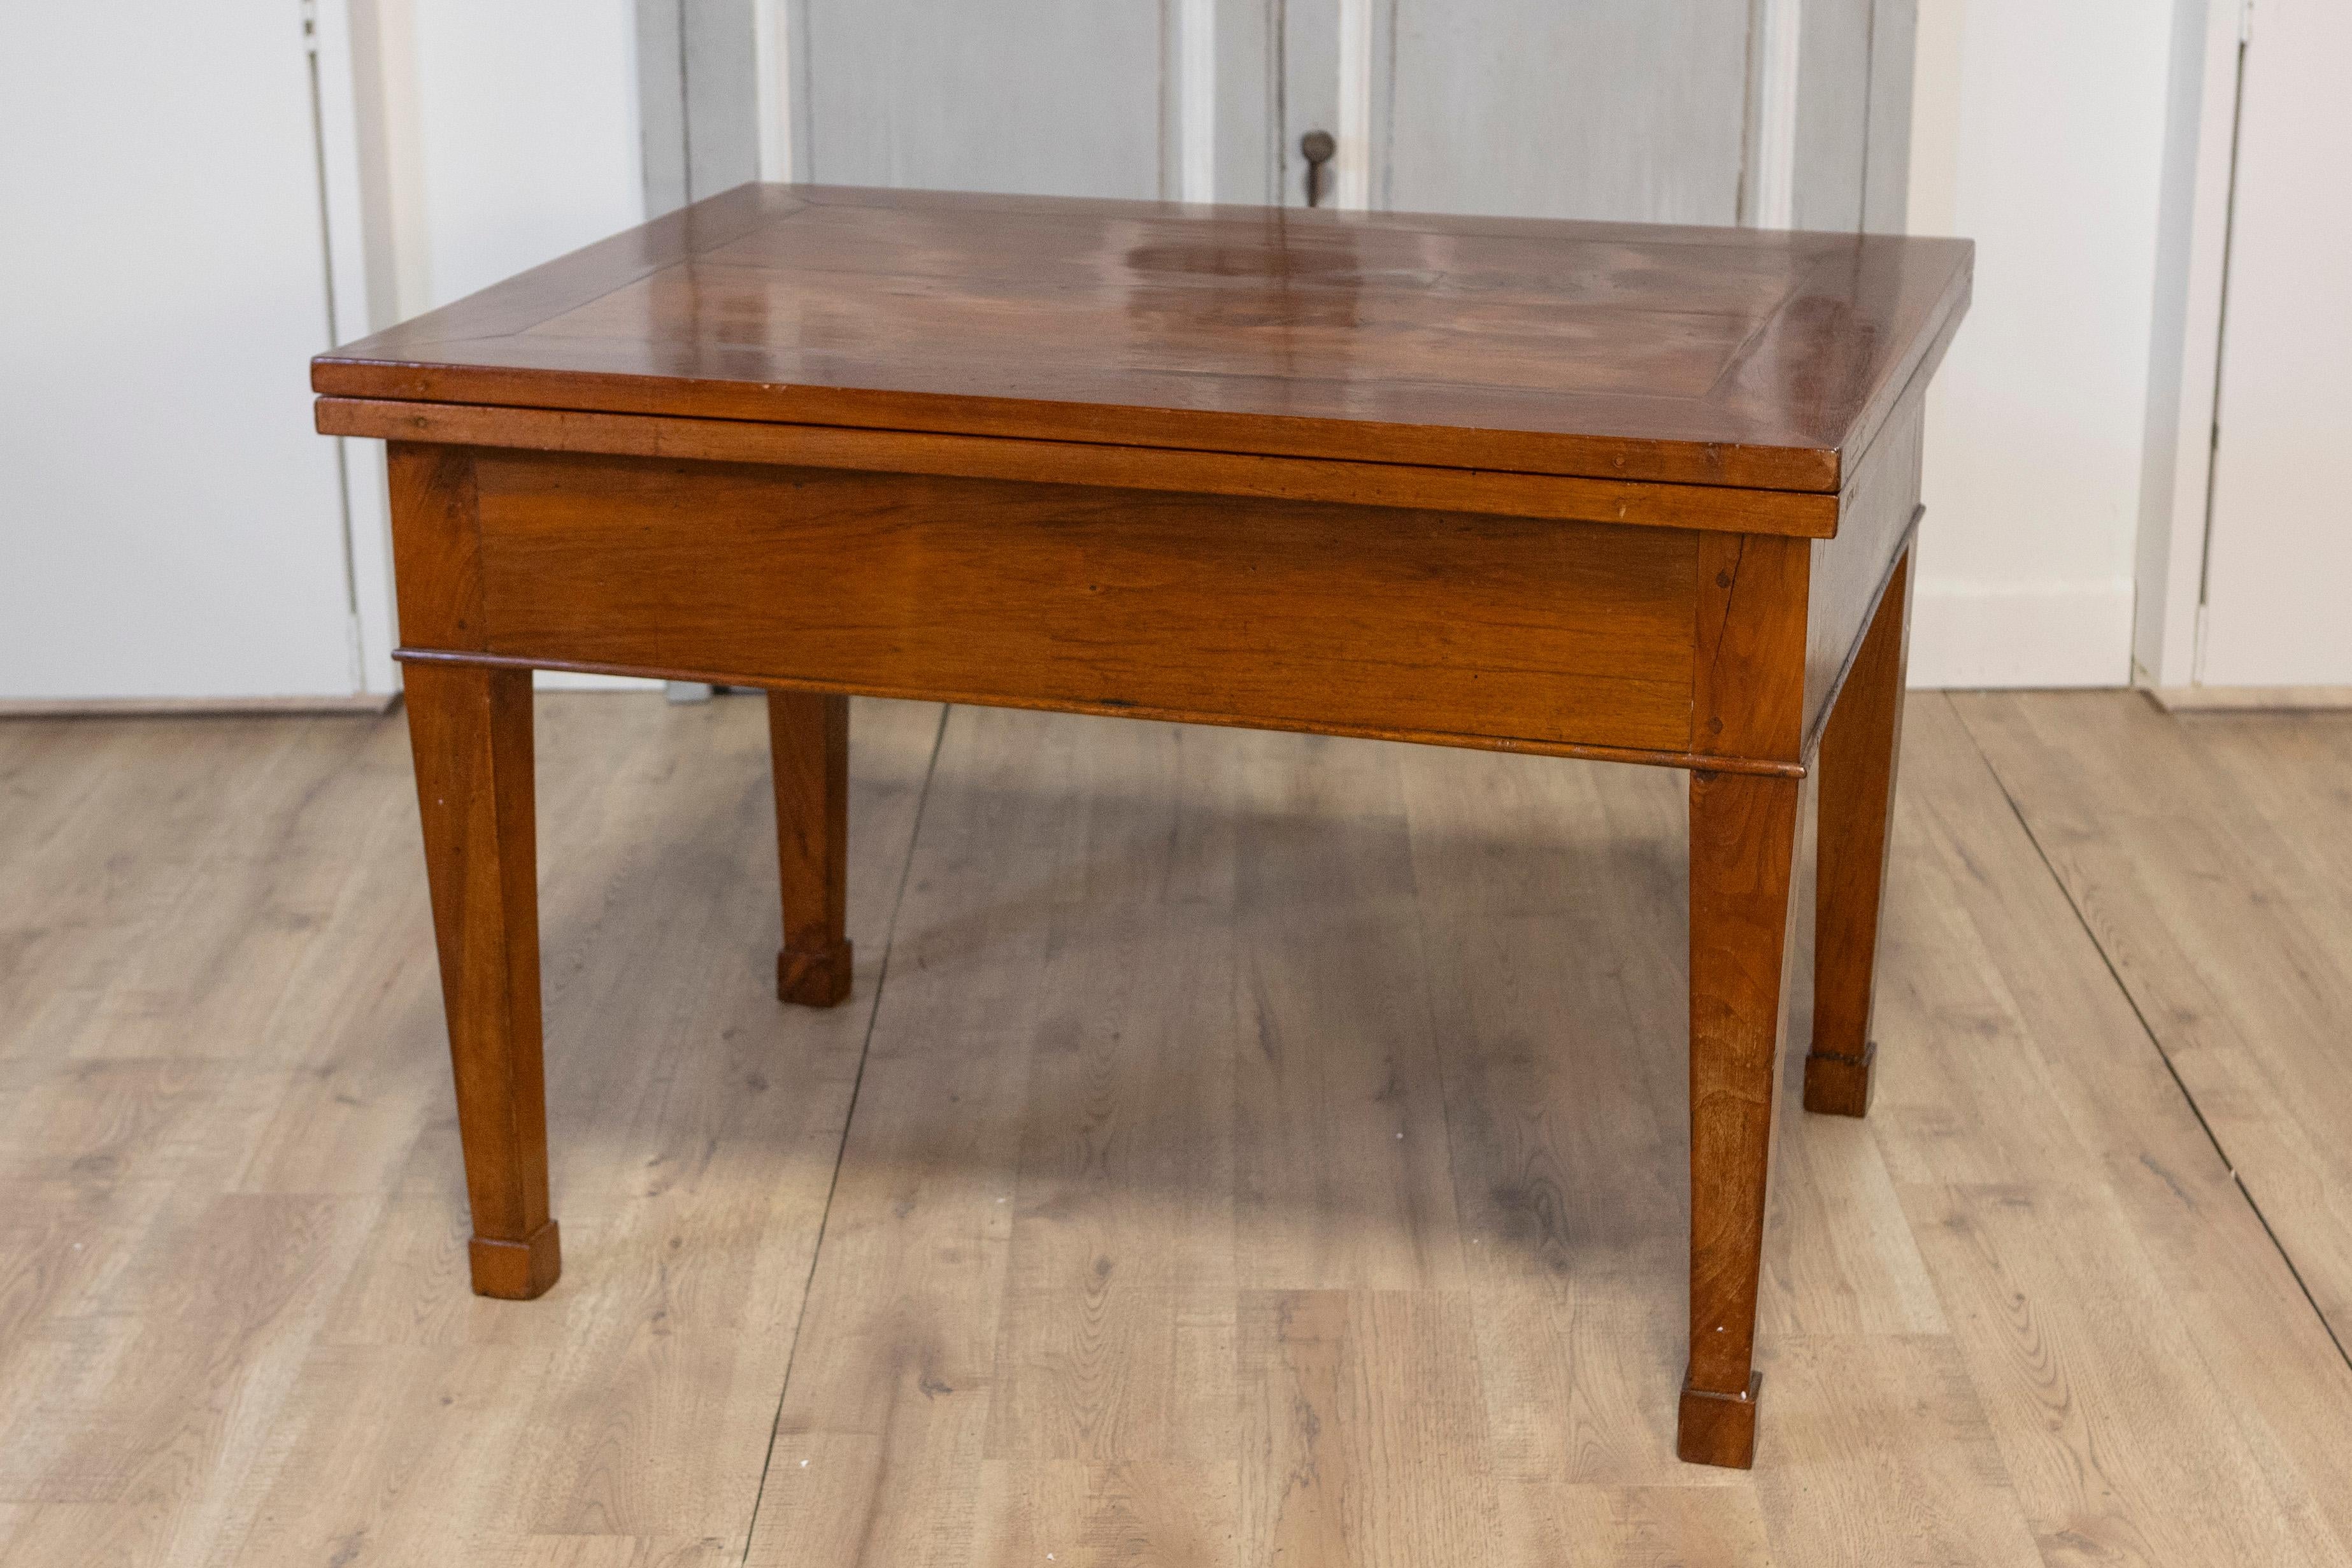 Italian Early 19th Century Walnut Folding Table with Tapered Legs For Sale 1